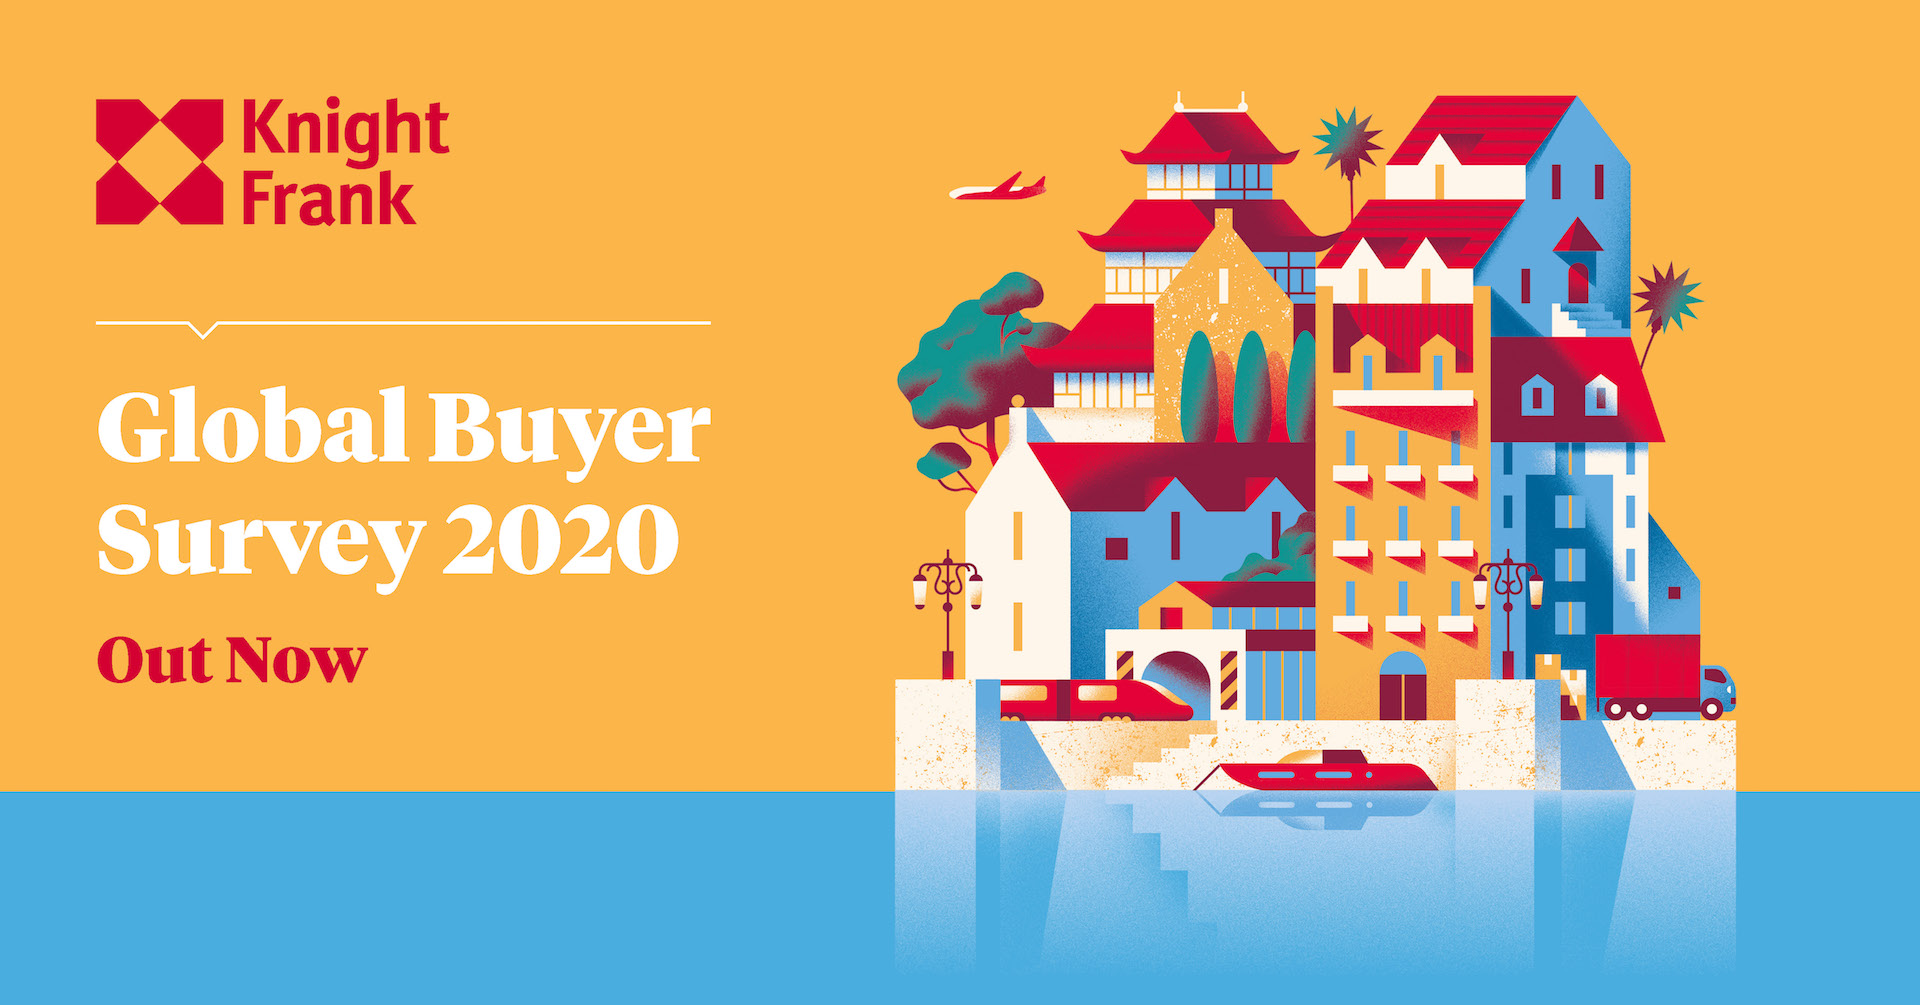 Knight Frank’s Global Buyer Survey 2020 released